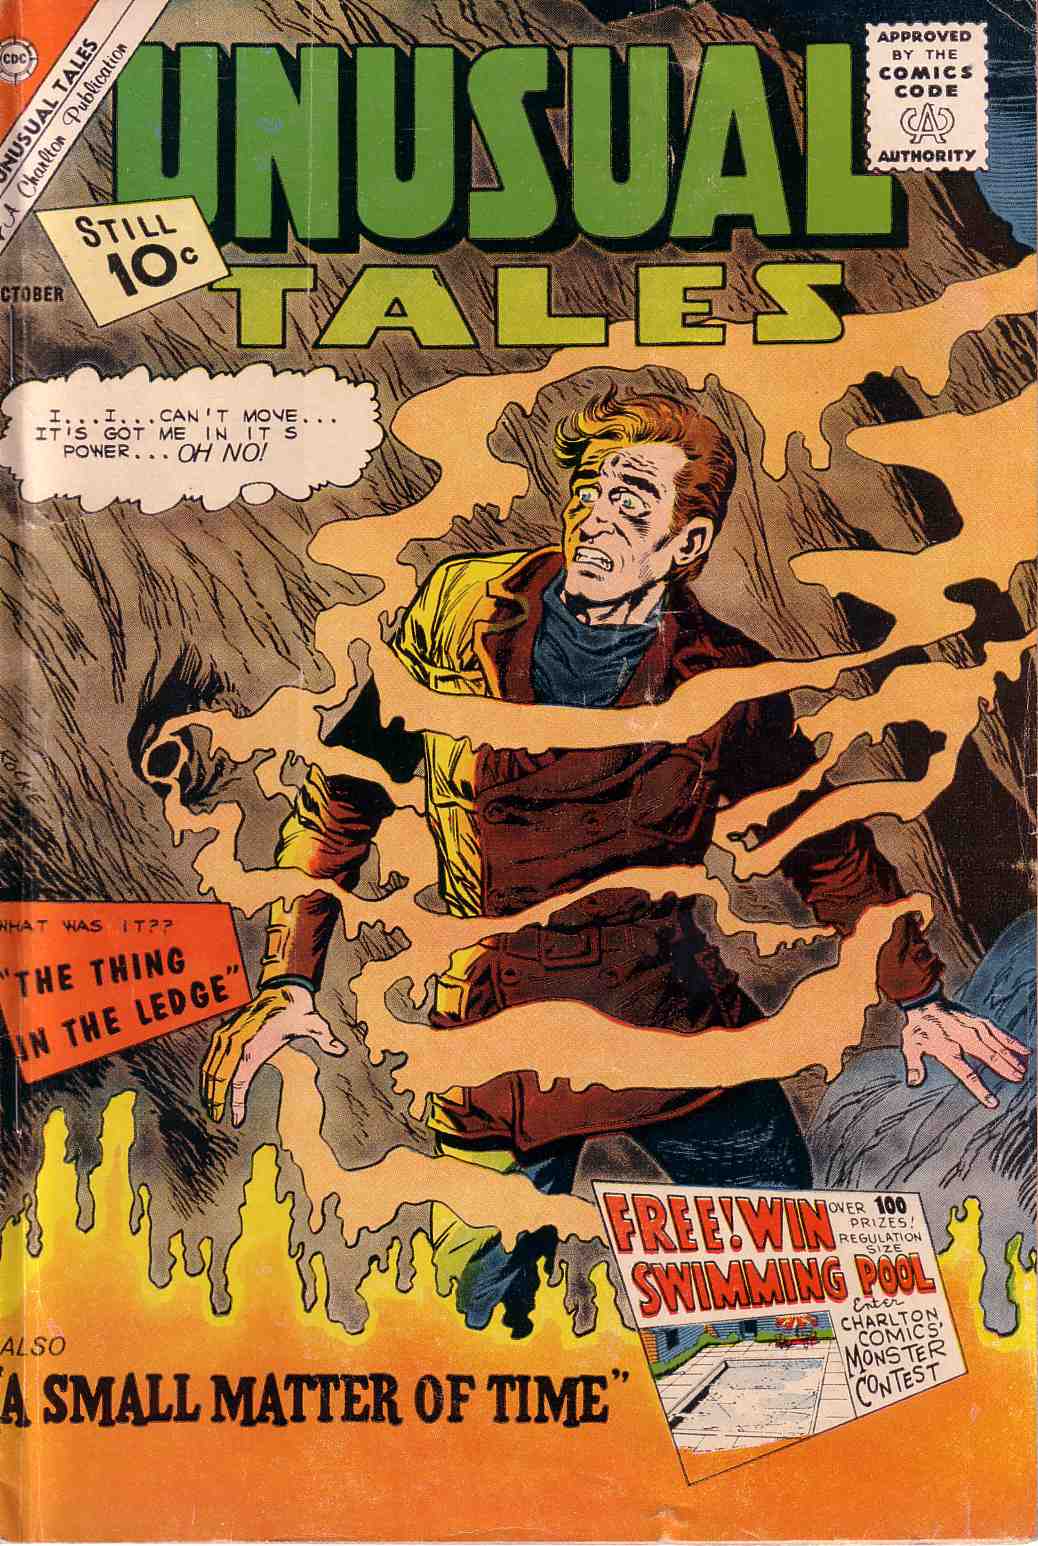 Book Cover For Unusual Tales 30